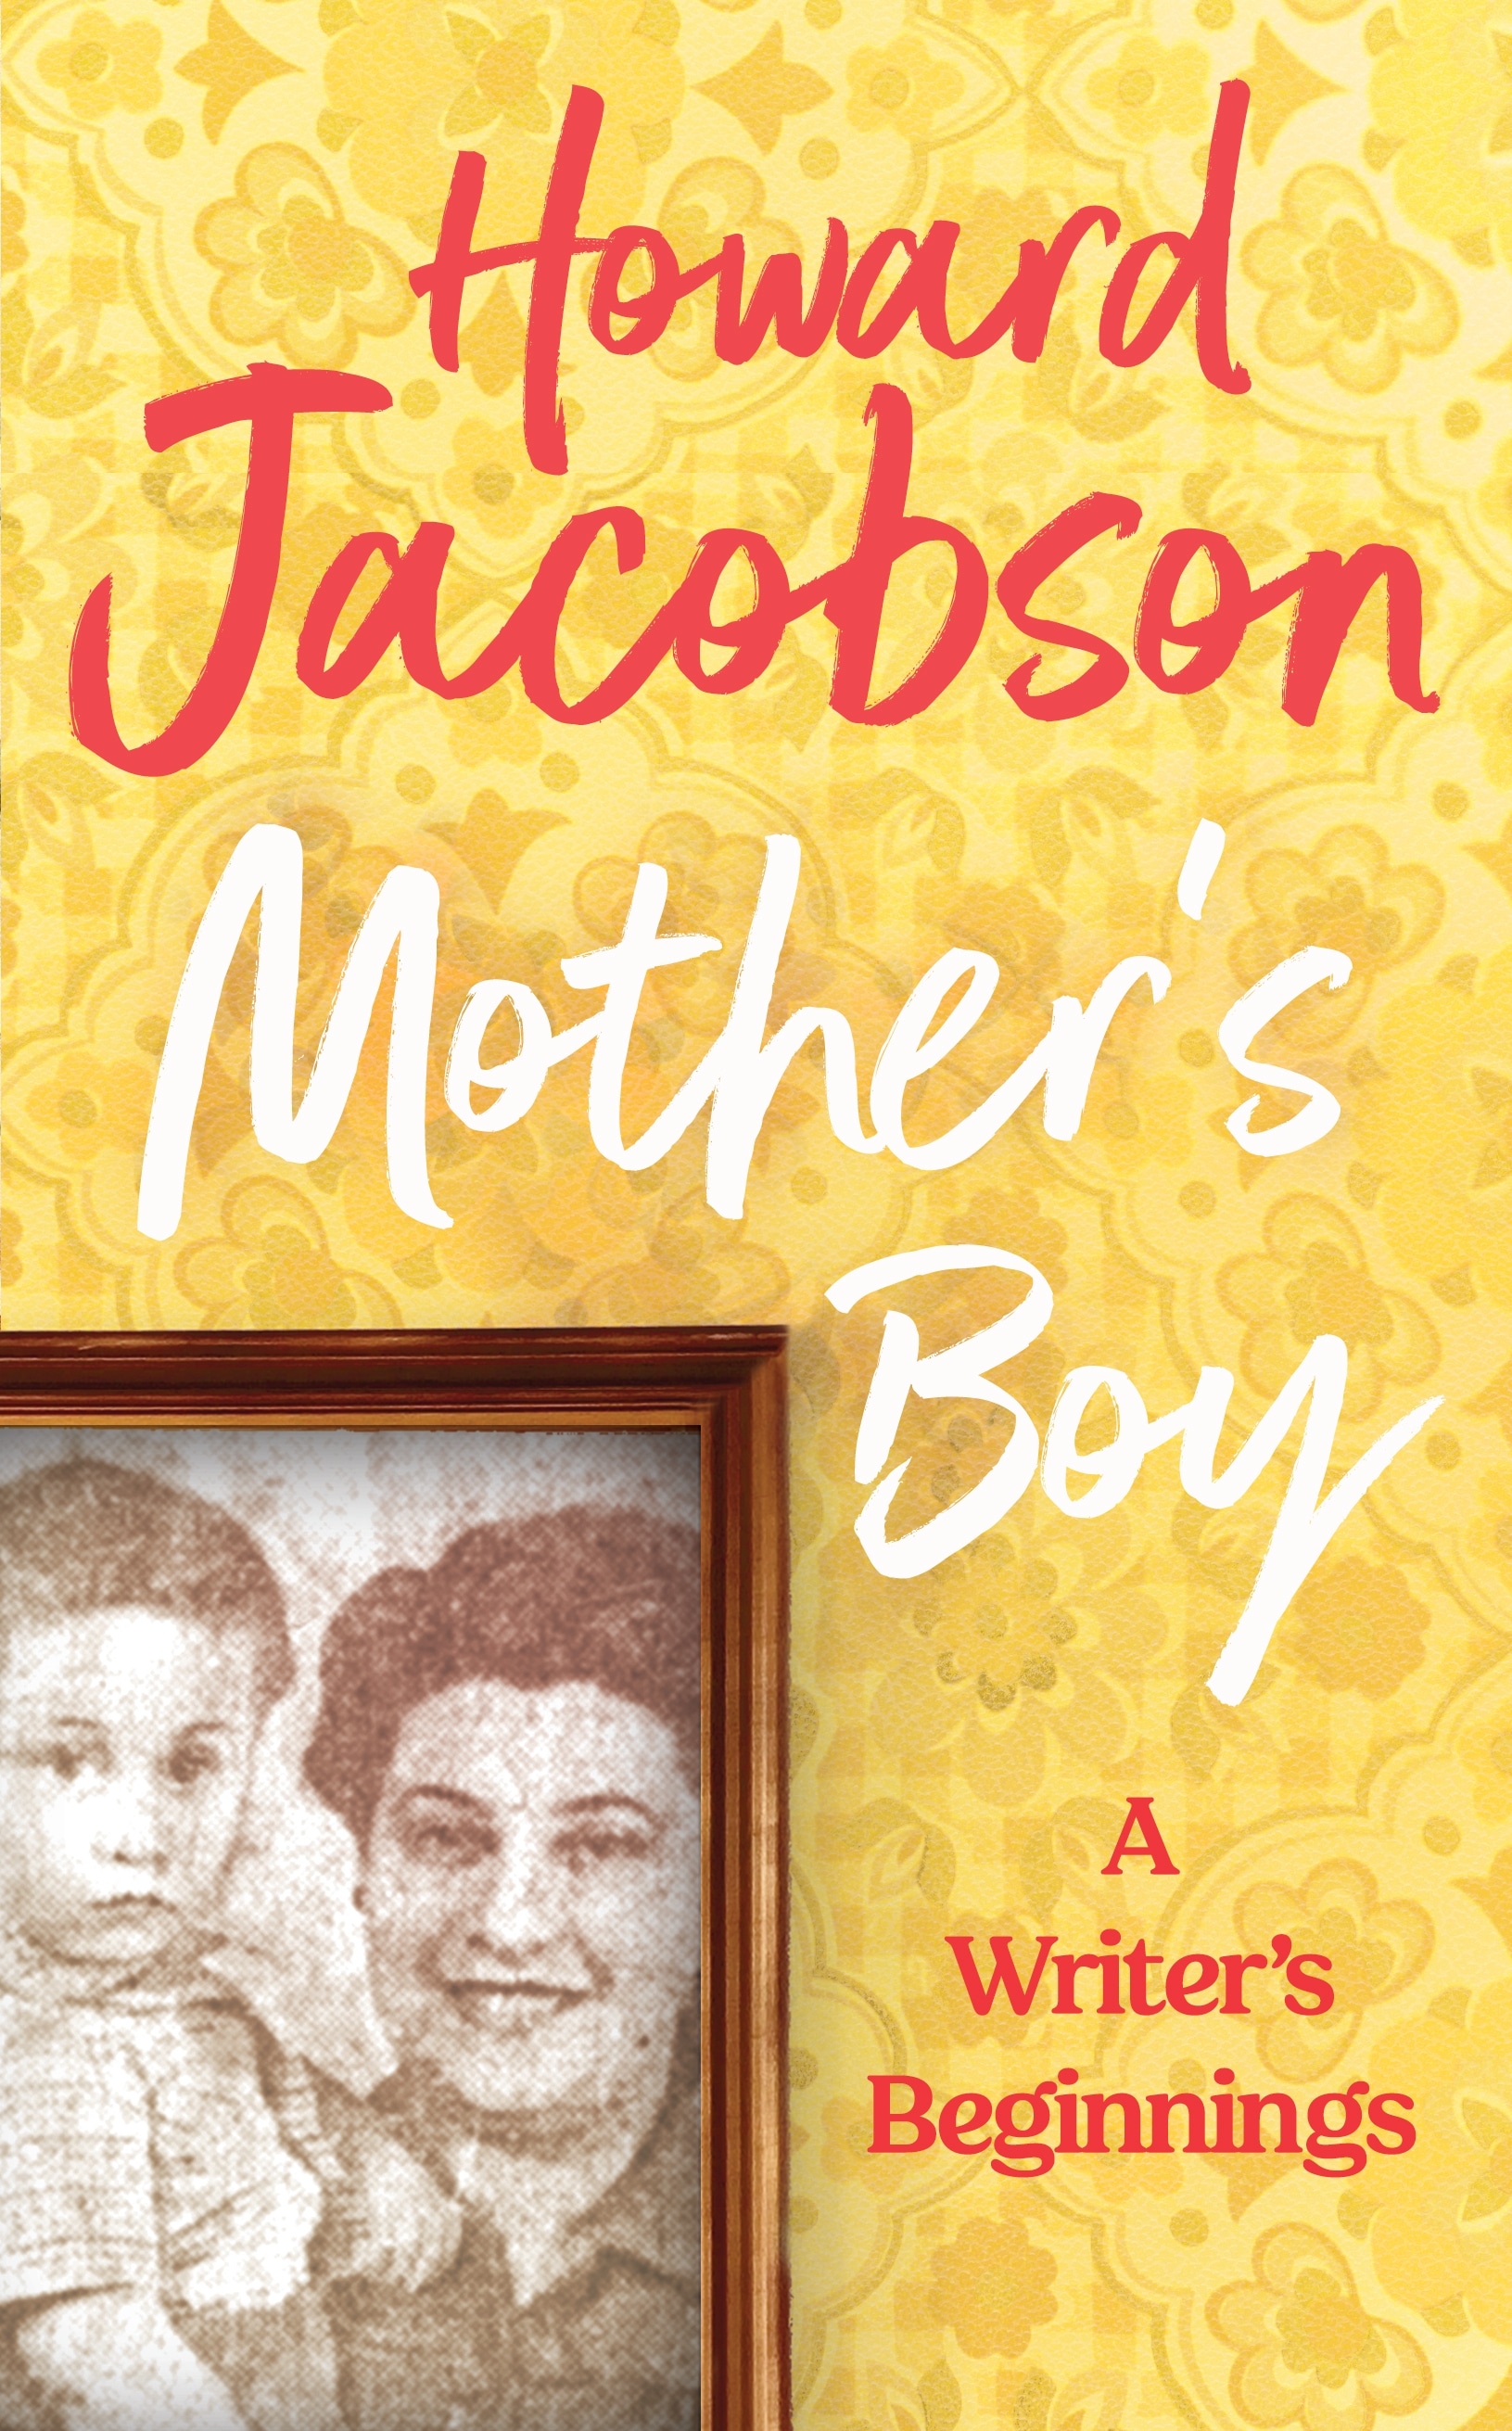 Book “Mother's Boy” by Howard Jacobson — March 3, 2022